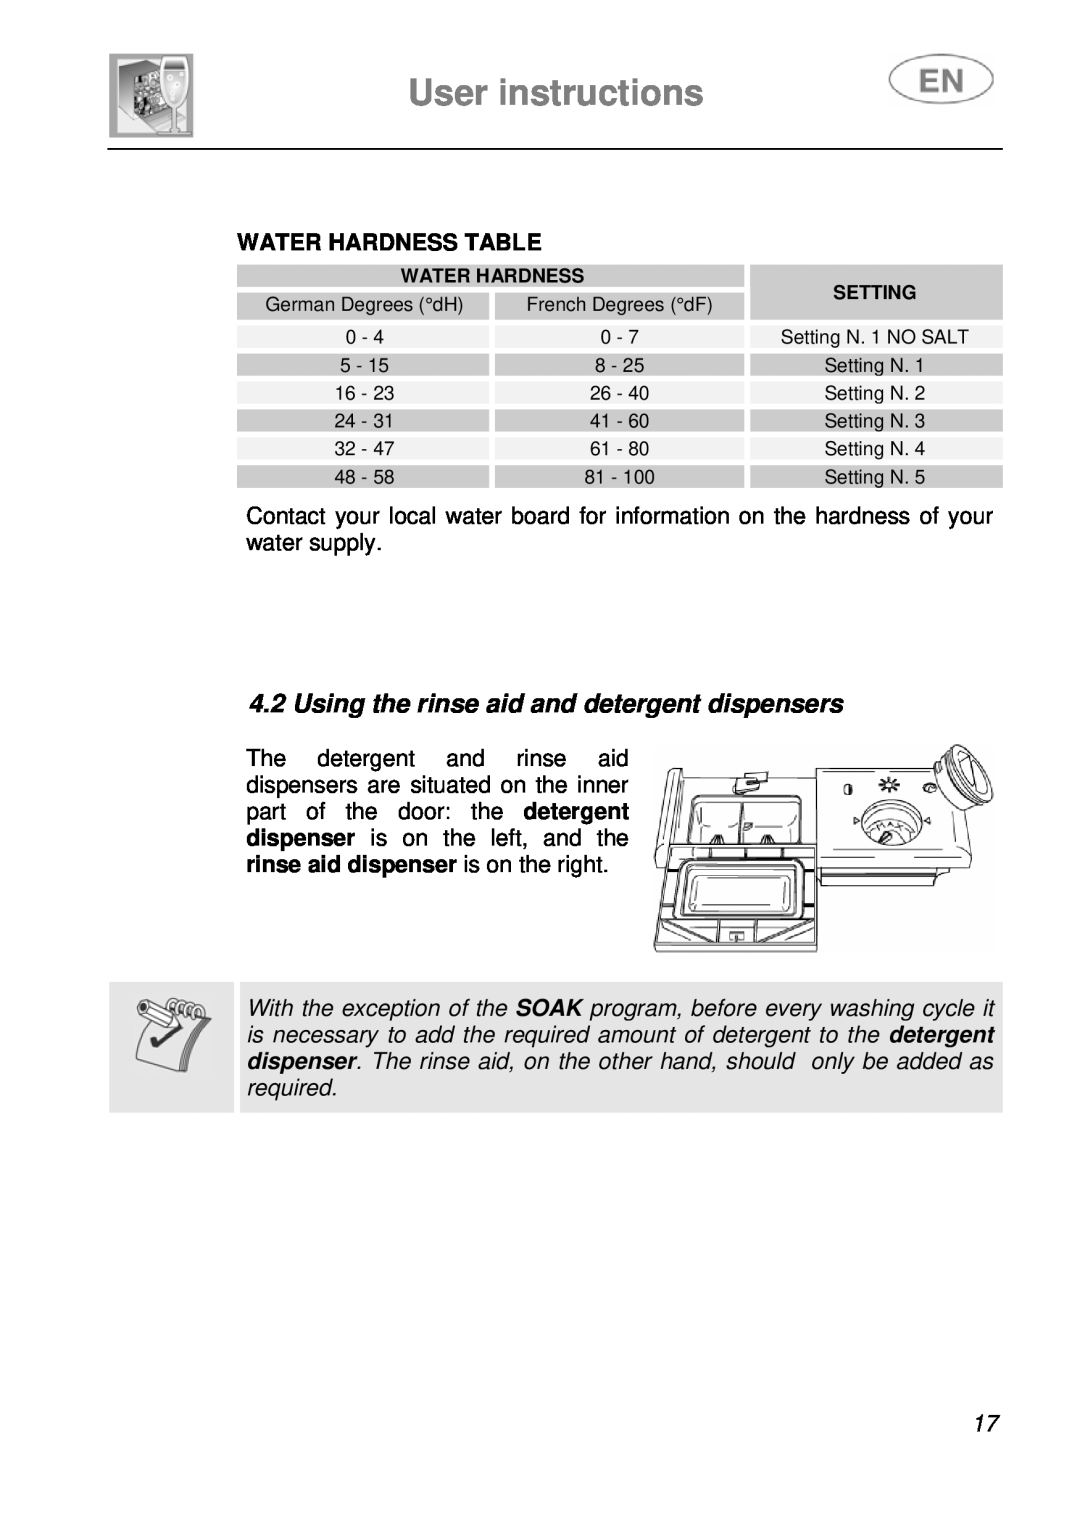 Smeg KLS55B instruction manual Using the rinse aid and detergent dispensers, Water Hardness Table, User instructions 